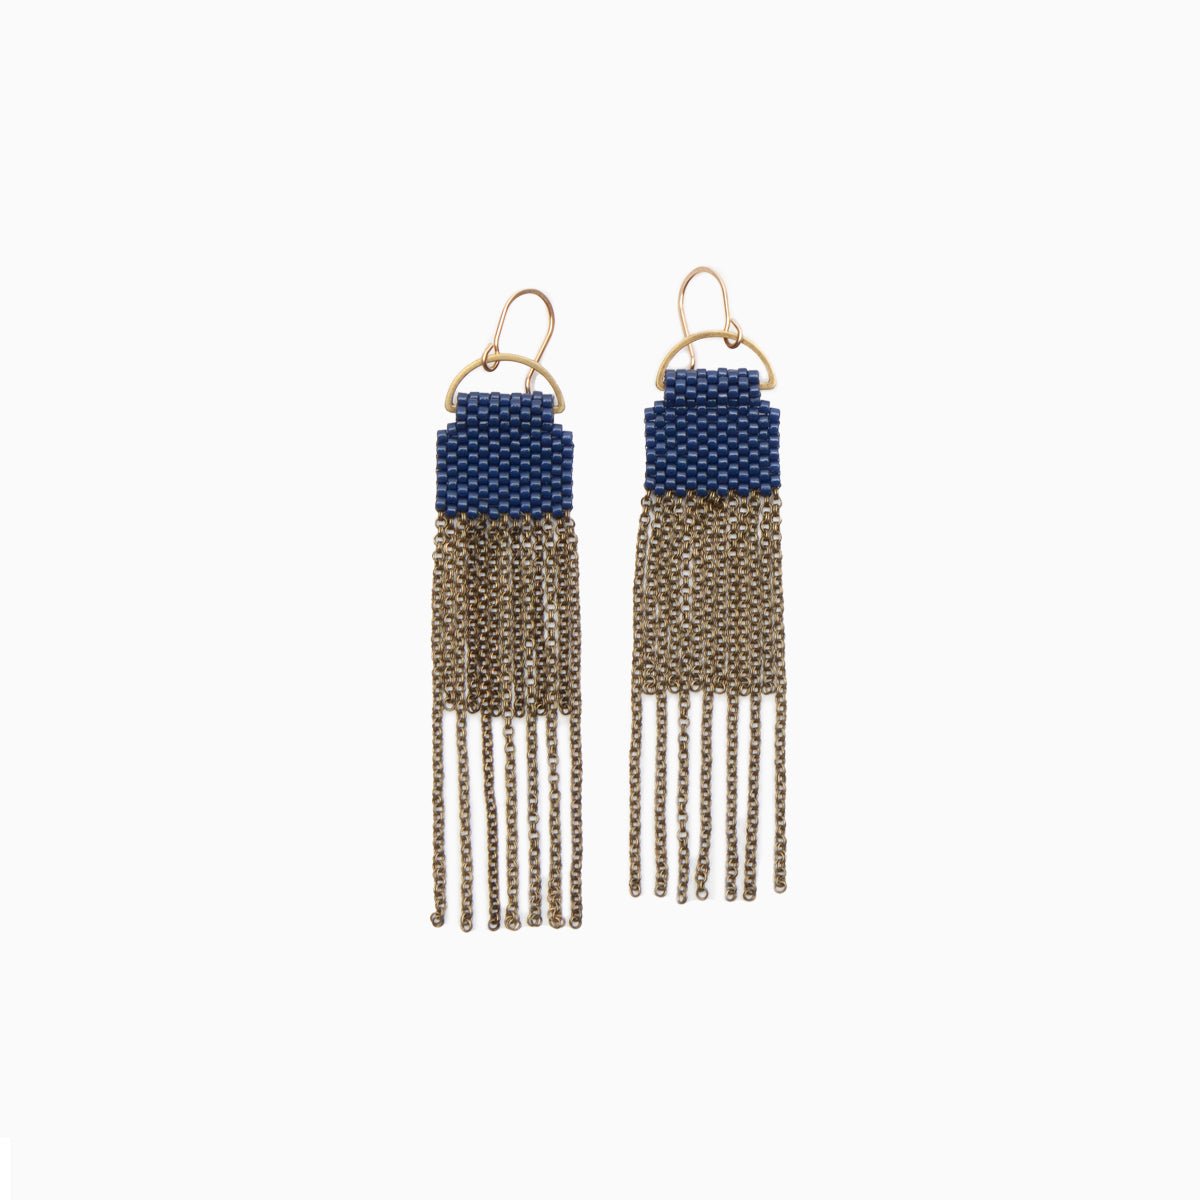 A pair of navy blue beaded earrings with long strands of antique brass chain secured around a small brass hoop. The Curtain Earrings in Navy are designed and handcrafted by A Nod to Design in Portland, OR.